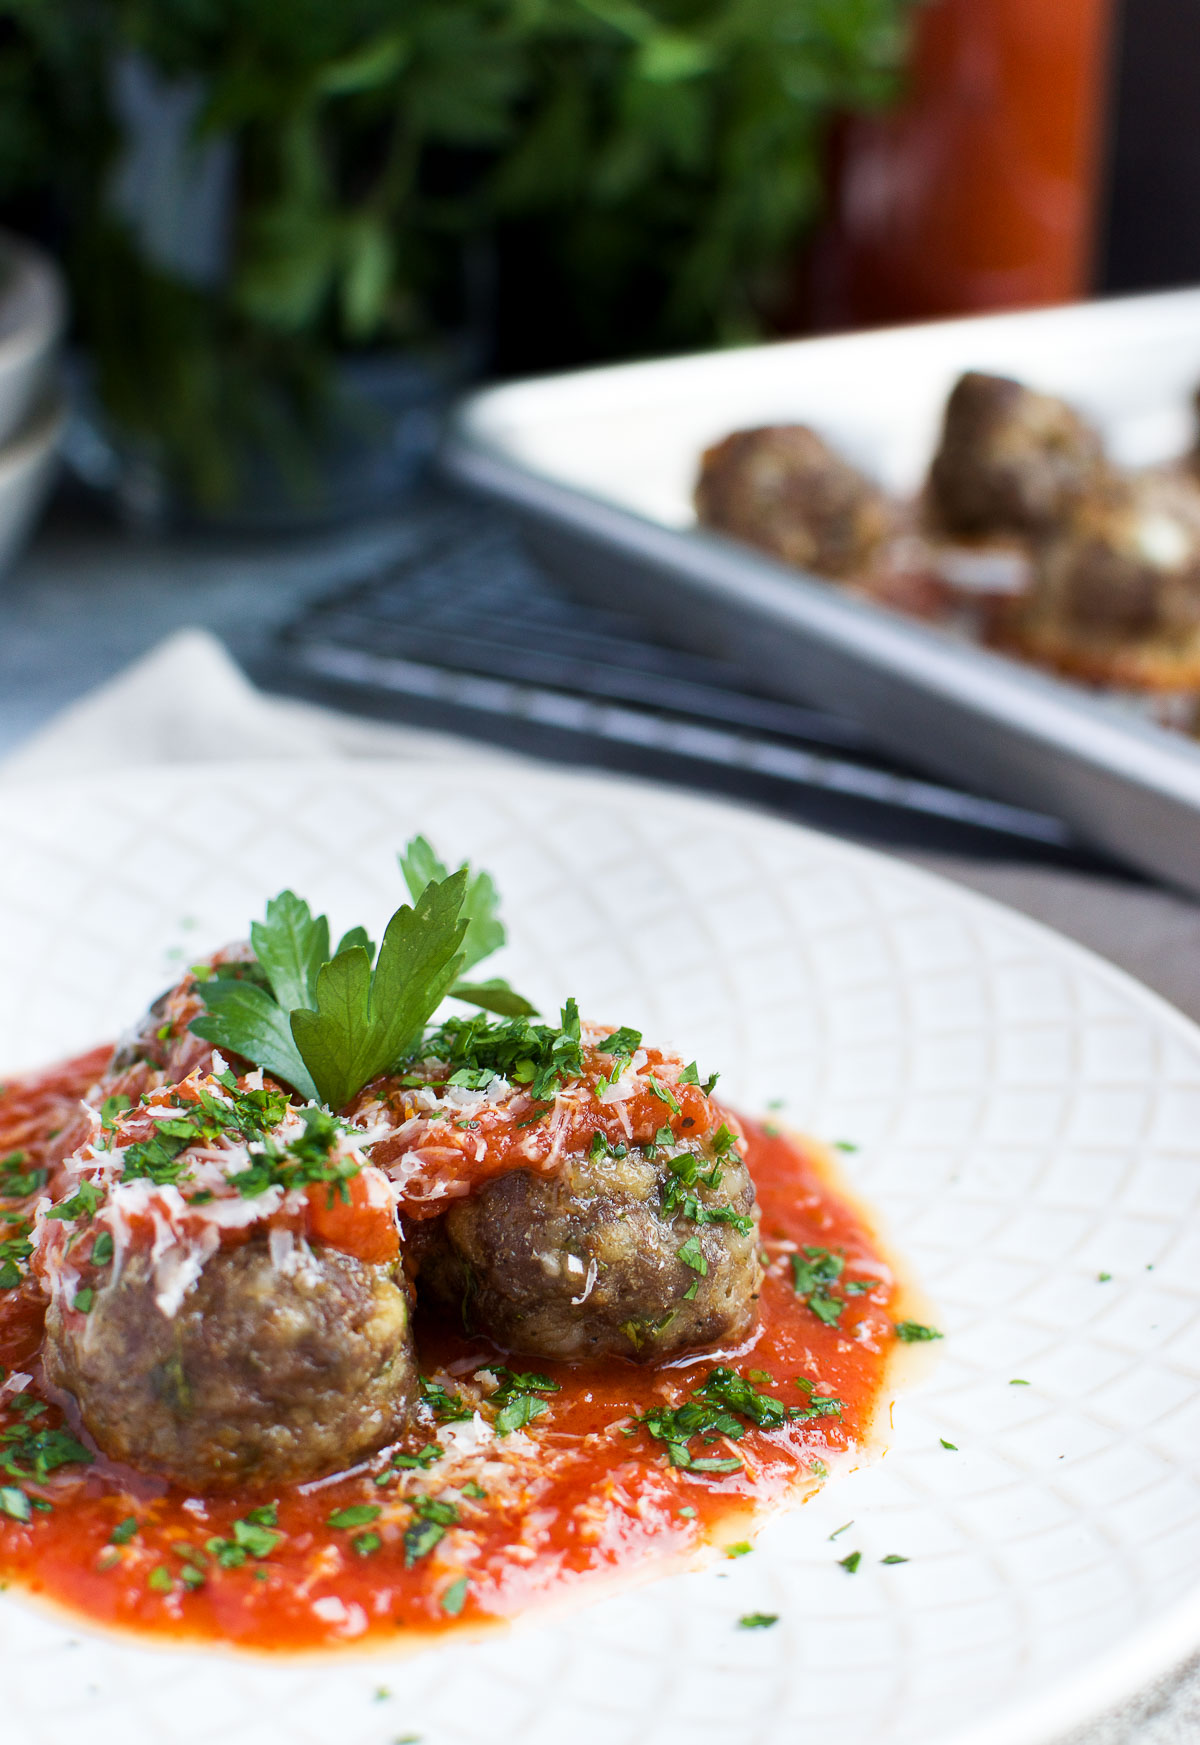 Ground beef and sausage meatballs in tomato sauce with fresh basil